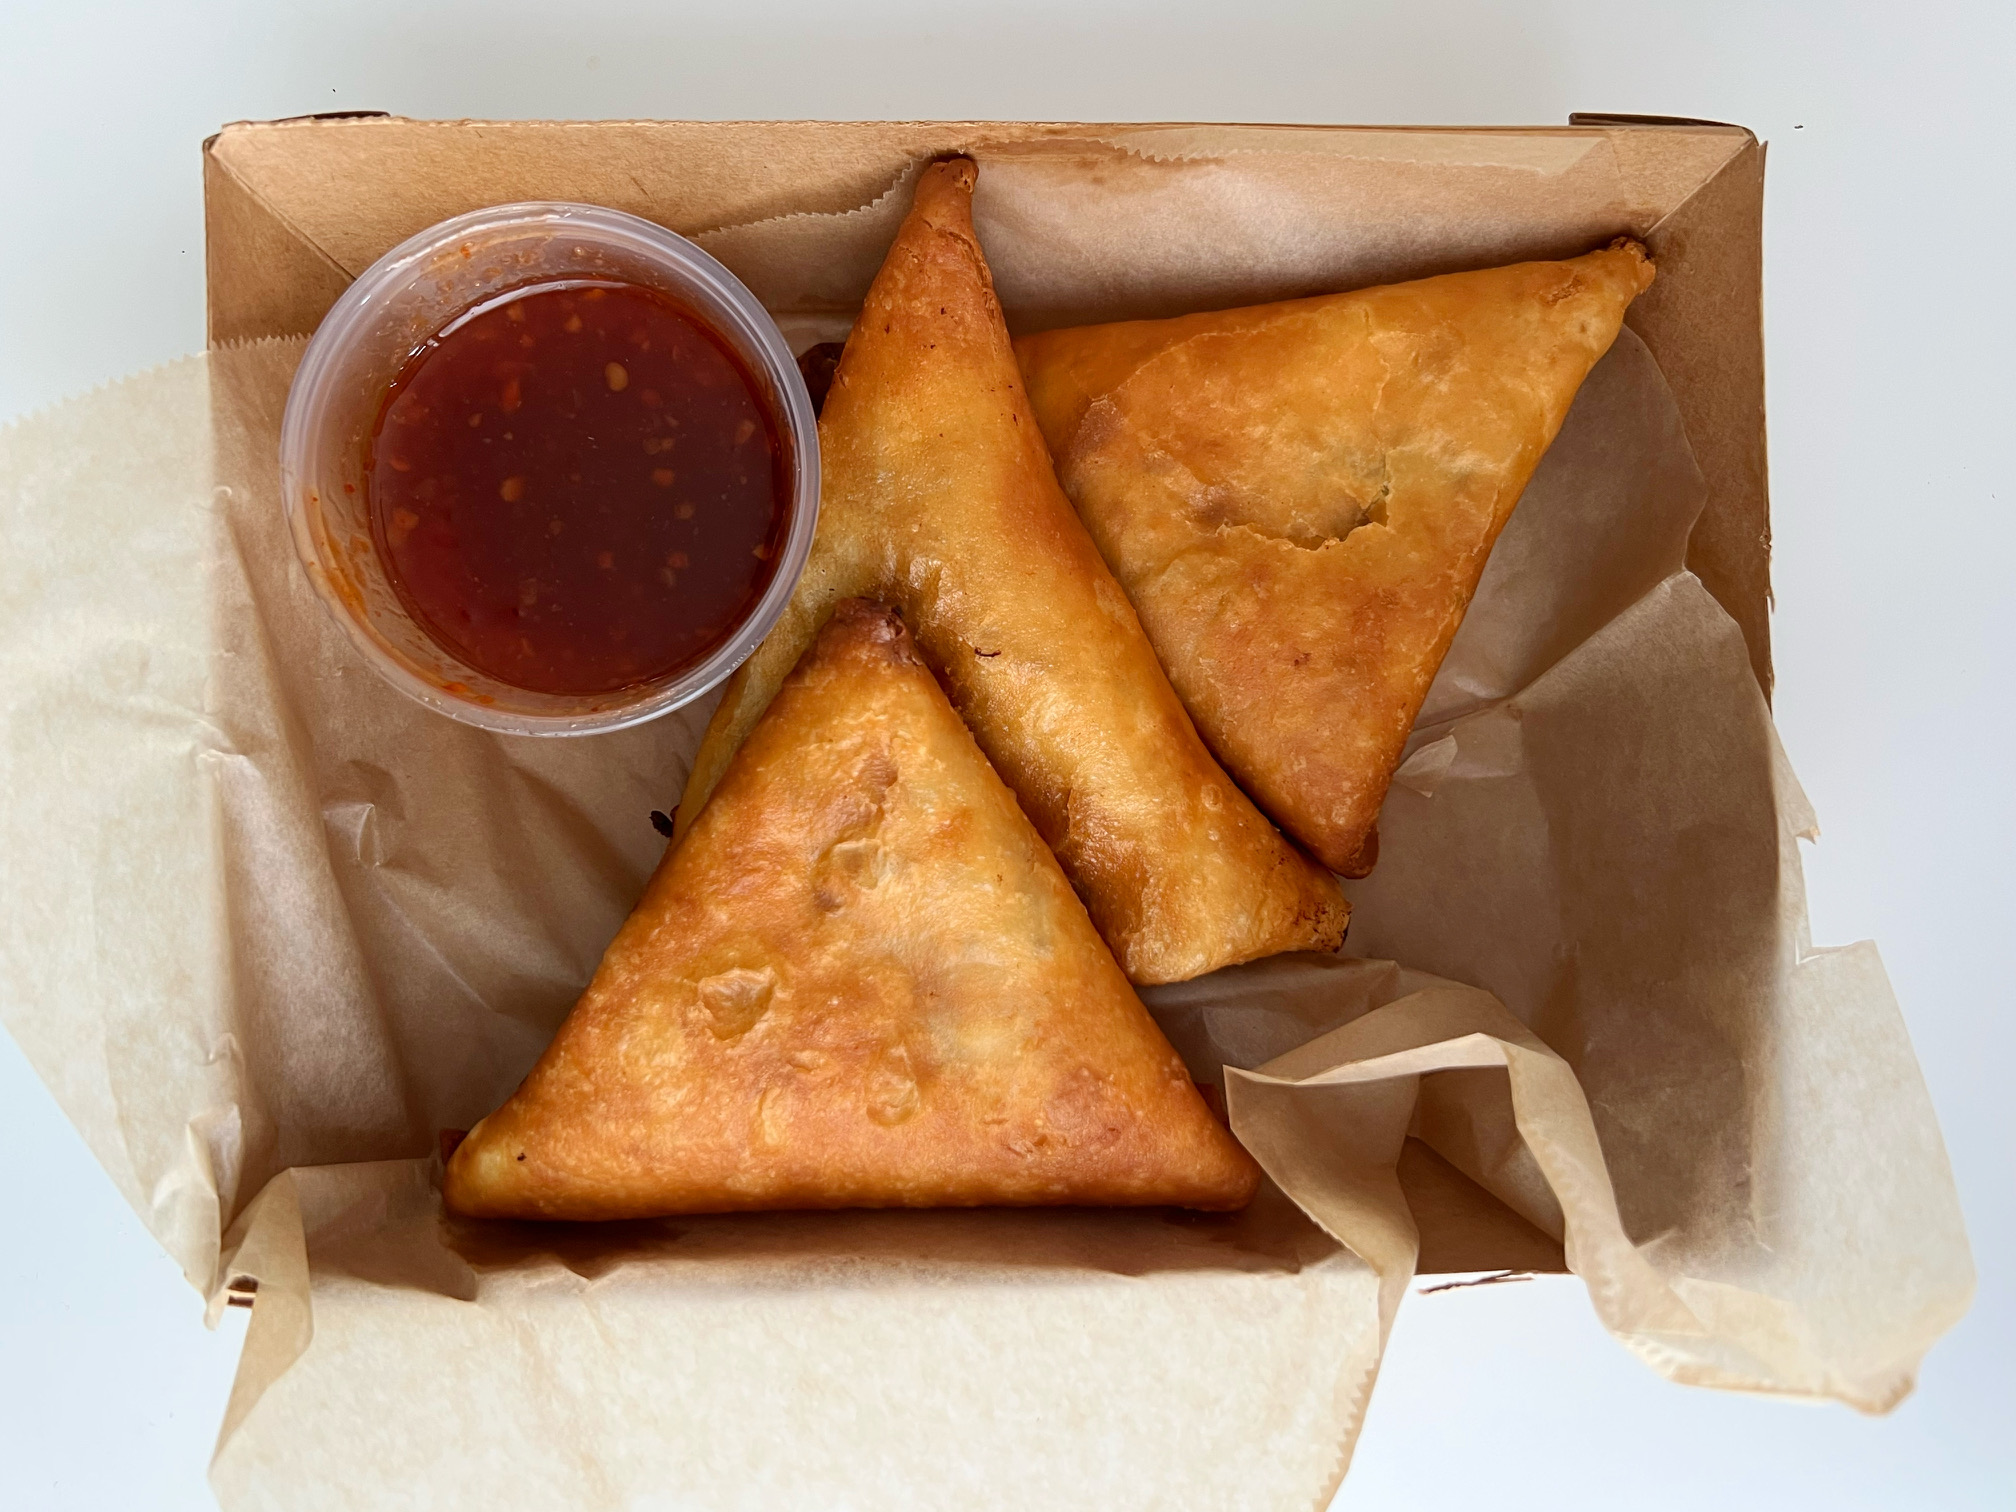 In a small cardboard box, there are three triangular samosas with a side cup of red chili sauce. Photo by Alyssa Buckley.